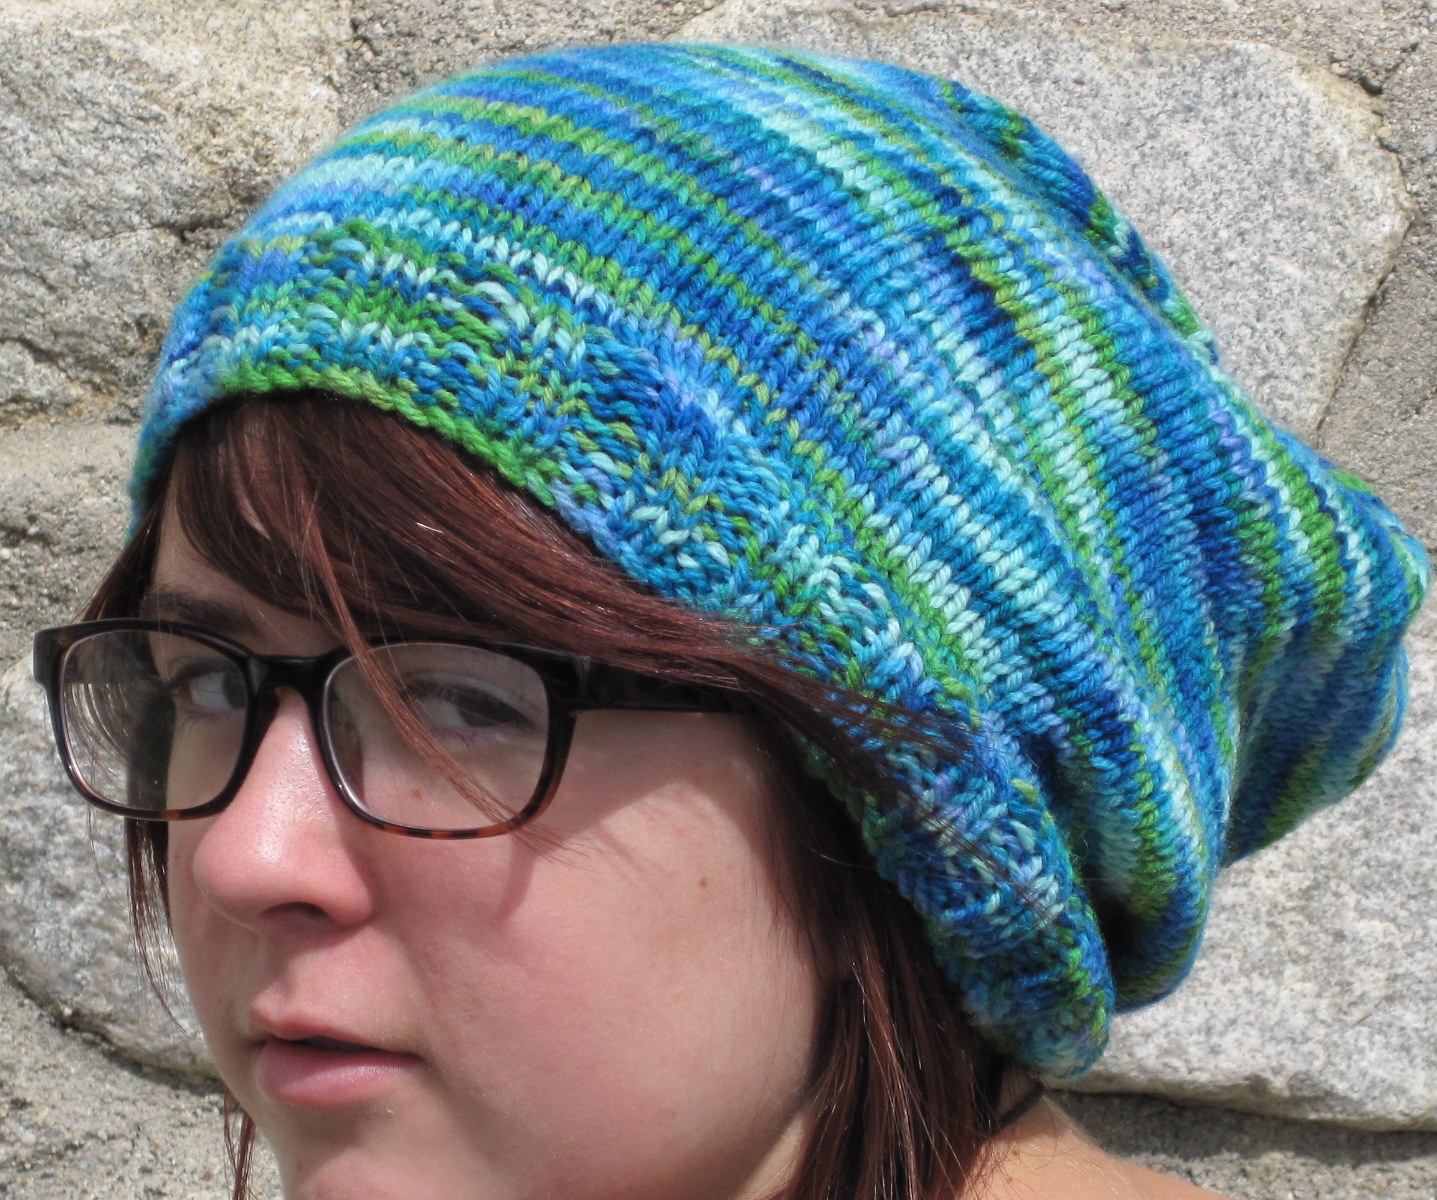 Crafting With Style: Free Pattern for Knit Slouchy Hat